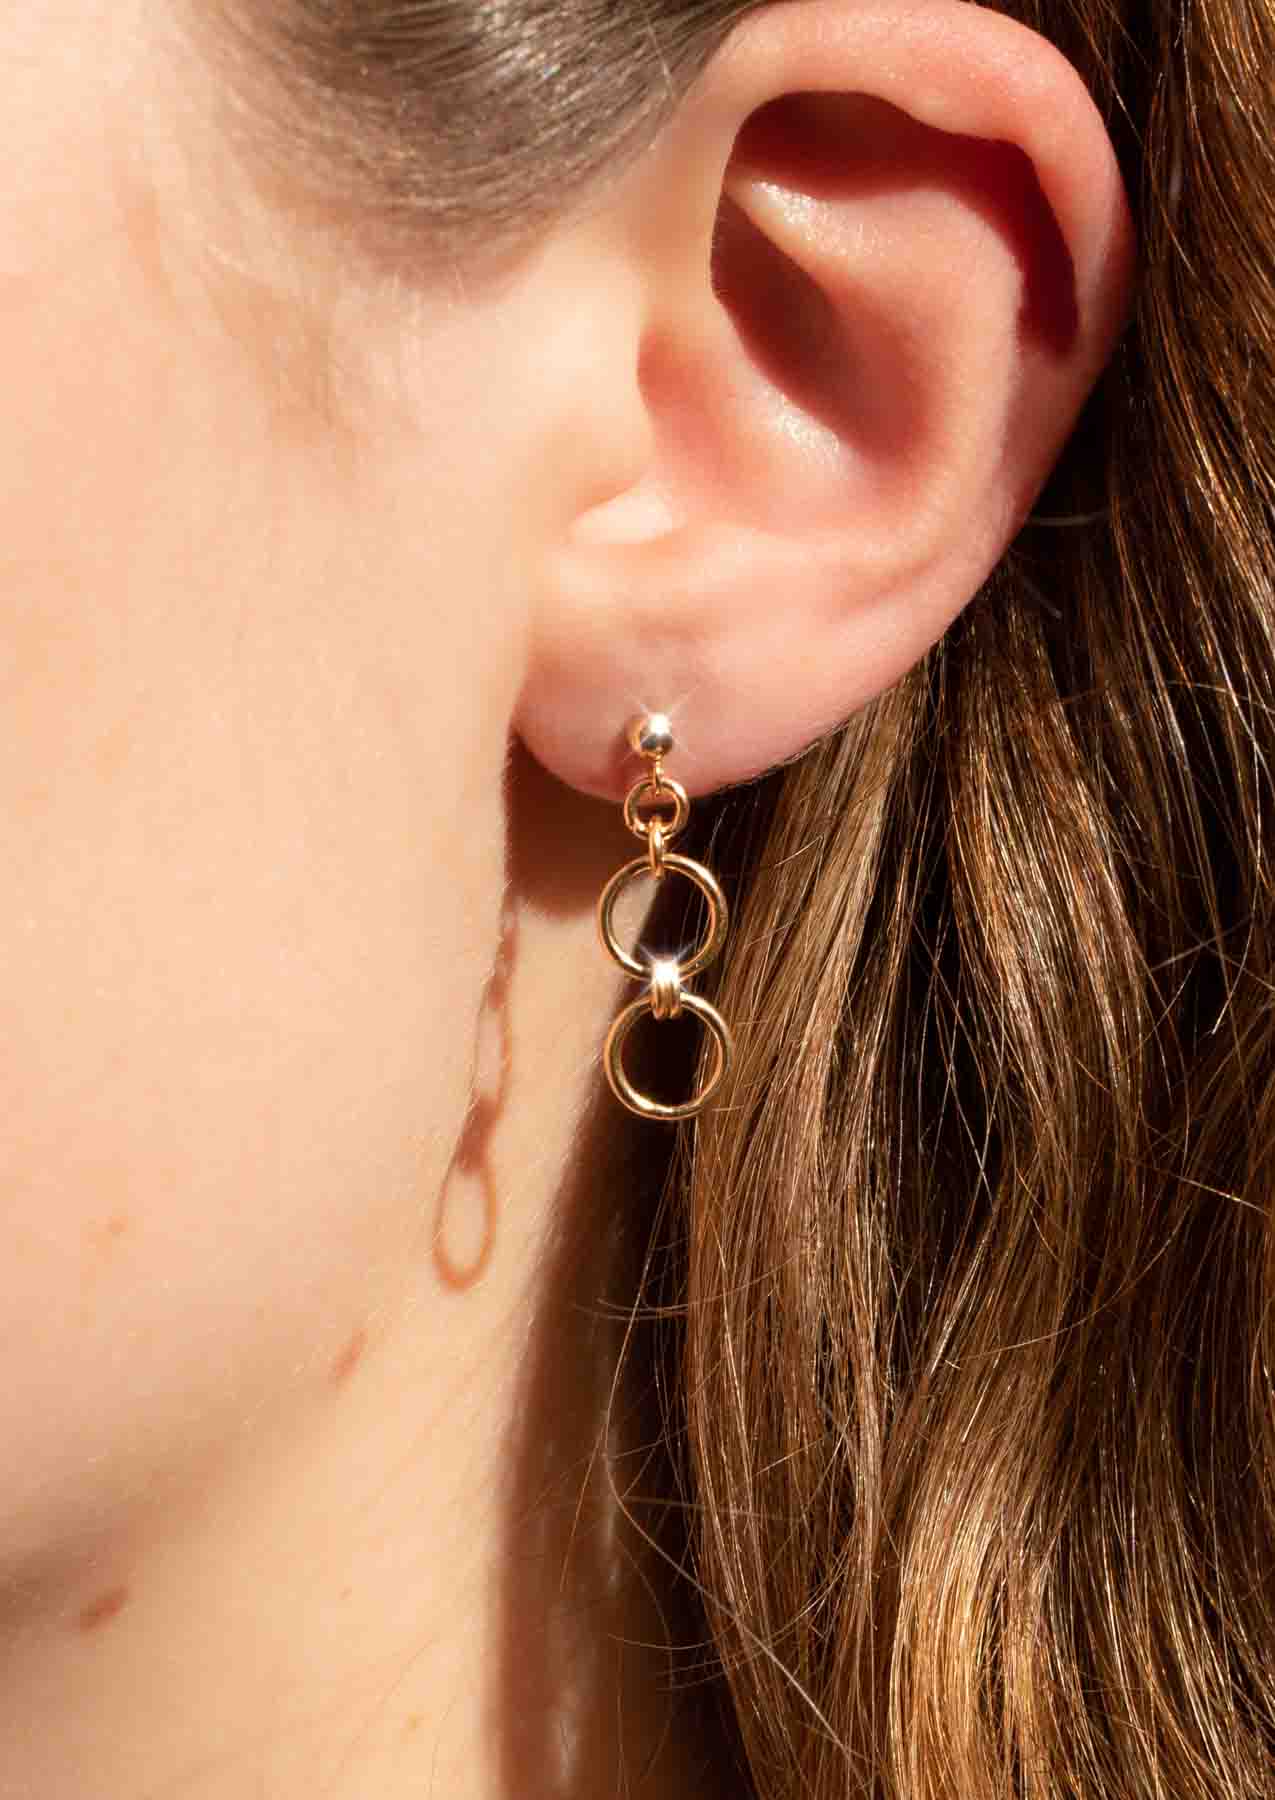 The Sunray 14ct Gold Filled Drop Earrings